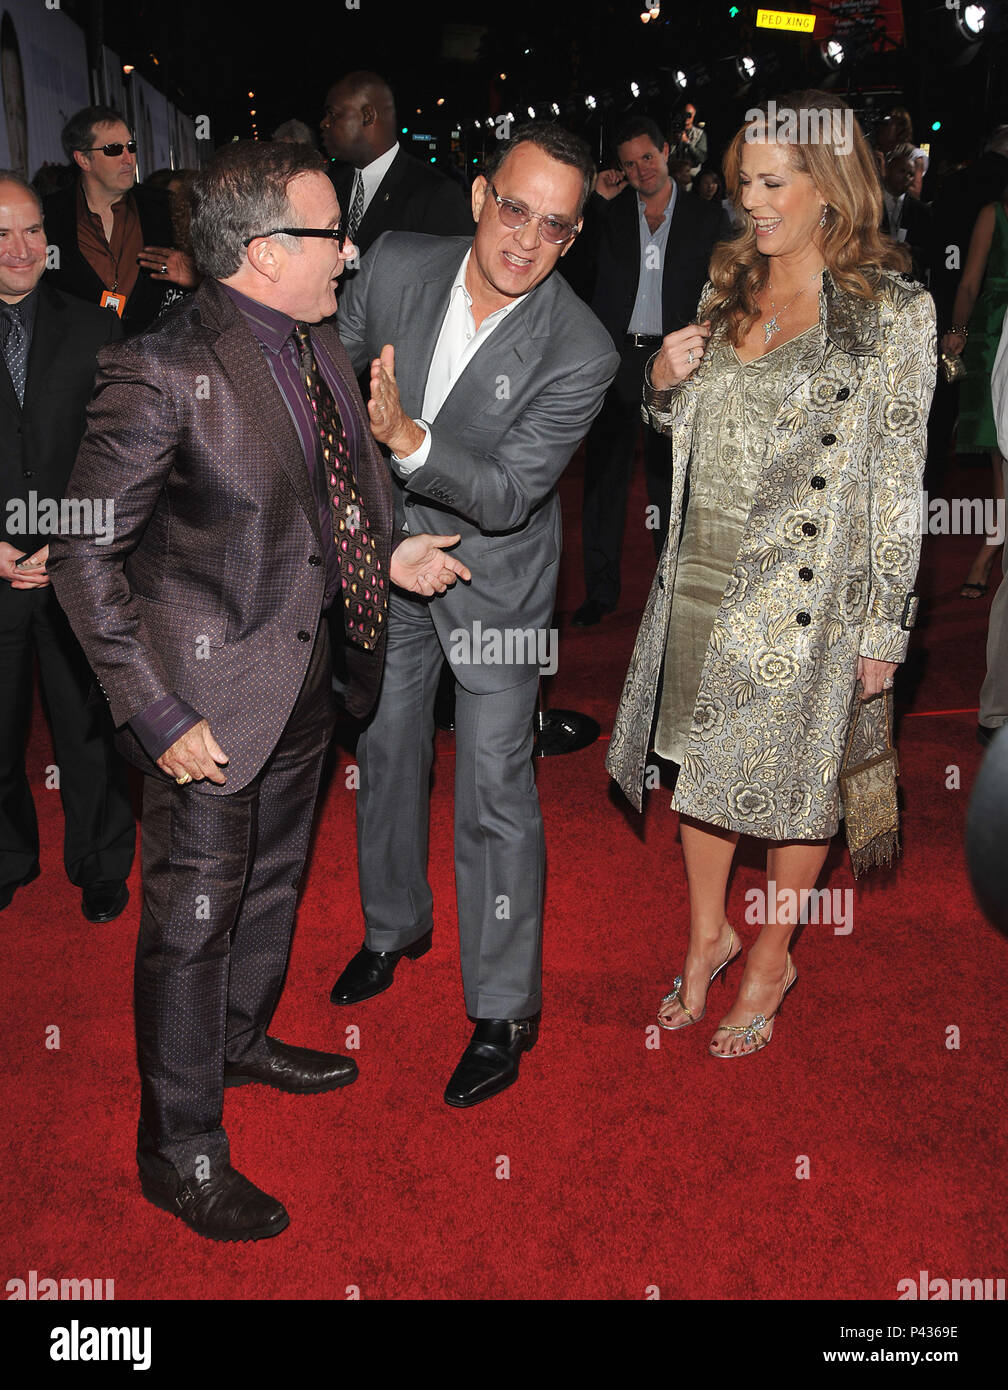 Robin Williams, with John Travolta and Kelly Preston ( checking the belly ! )   - Old Dogs Premiere at the El Capitan Theatre In Los Angeles.          -            07 WilliamsR HanksT WilsonRita 07.jpg07 WilliamsR HanksT WilsonRita 07  Event in Hollywood Life - California, Red Carpet Event, USA, Film Industry, Celebrities, Photography, Bestof, Arts Culture and Entertainment, Topix Celebrities fashion, Best of, Hollywood Life, Event in Hollywood Life - California, Red Carpet and backstage, movie celebrities, TV celebrities, Music celebrities, Topix, actors from the same movie, cast and co star  Stock Photo